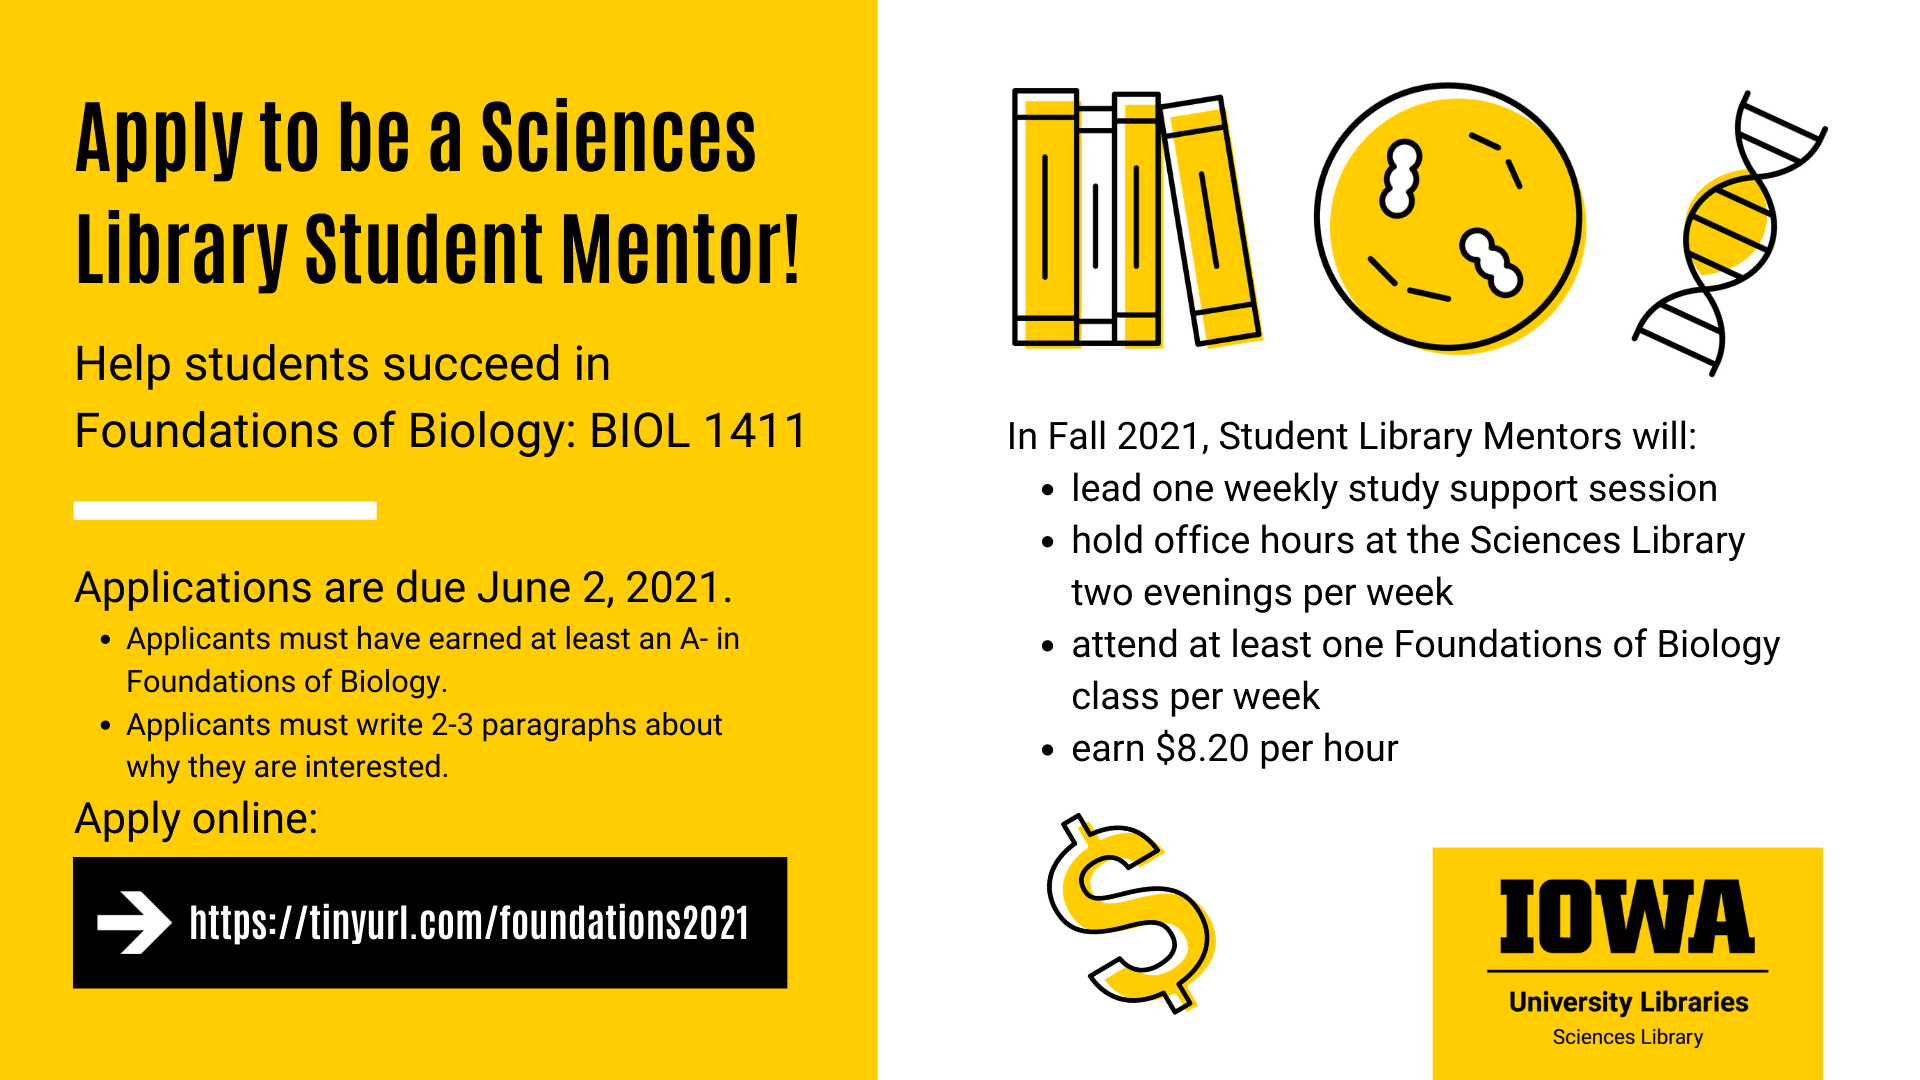 Apply to be a Sciences Library Student Mentor